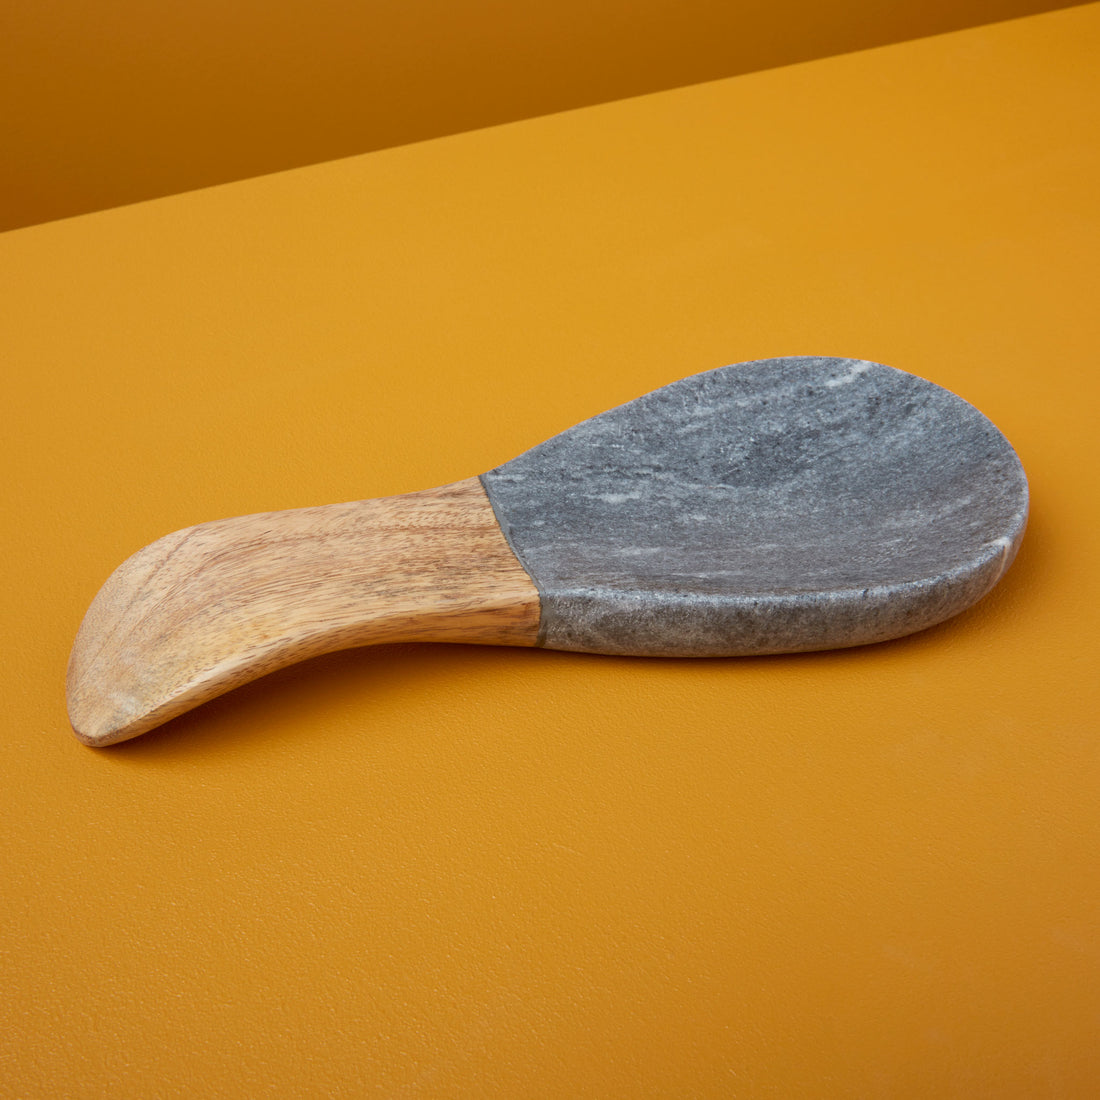 https://cdn.shopify.com/s/files/1/0376/0920/9900/products/Be-Home_Gray-Marble-and-Wood-Spoon-Rest_58-81G.jpg?v=1606155099&width=1100